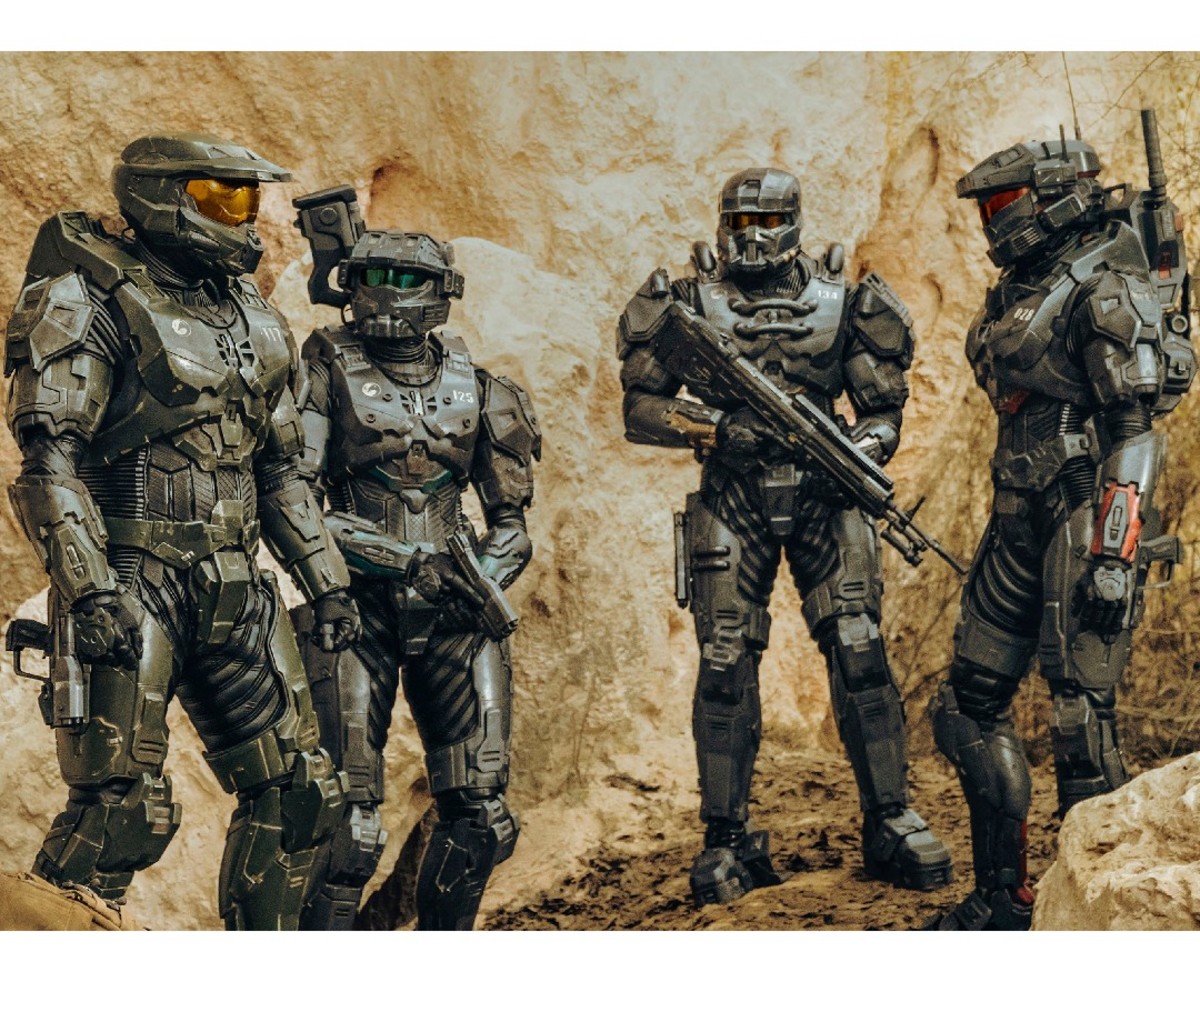 Group shot of Halo team in armor, led by Pablo Schreiber's Master Chief